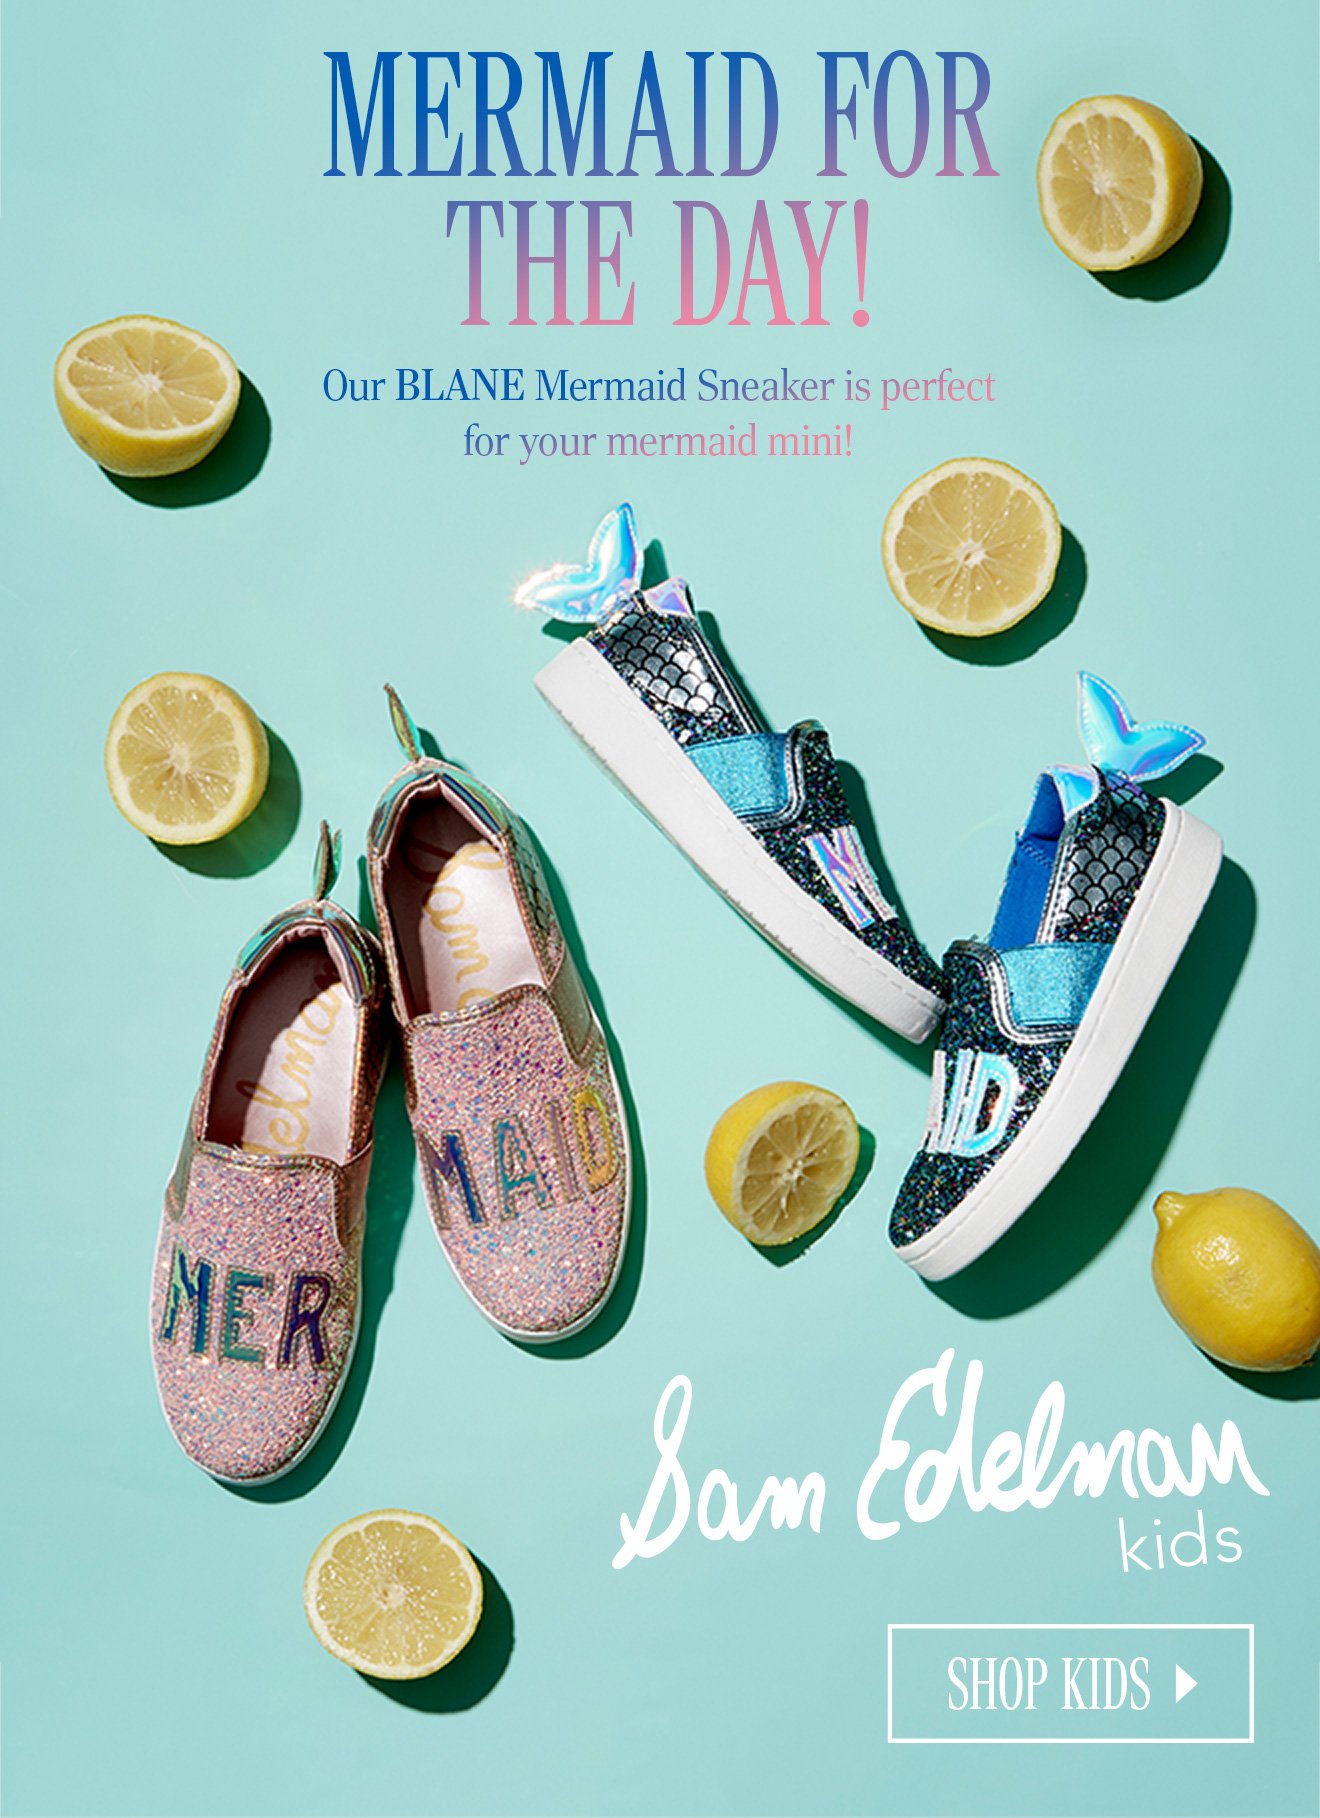 MERMAID FOR THE DAY! Our BLANE Mermaid Sneaker is perfect for your mermaid mini! Sam Edelman Kids. SHOP KIDS